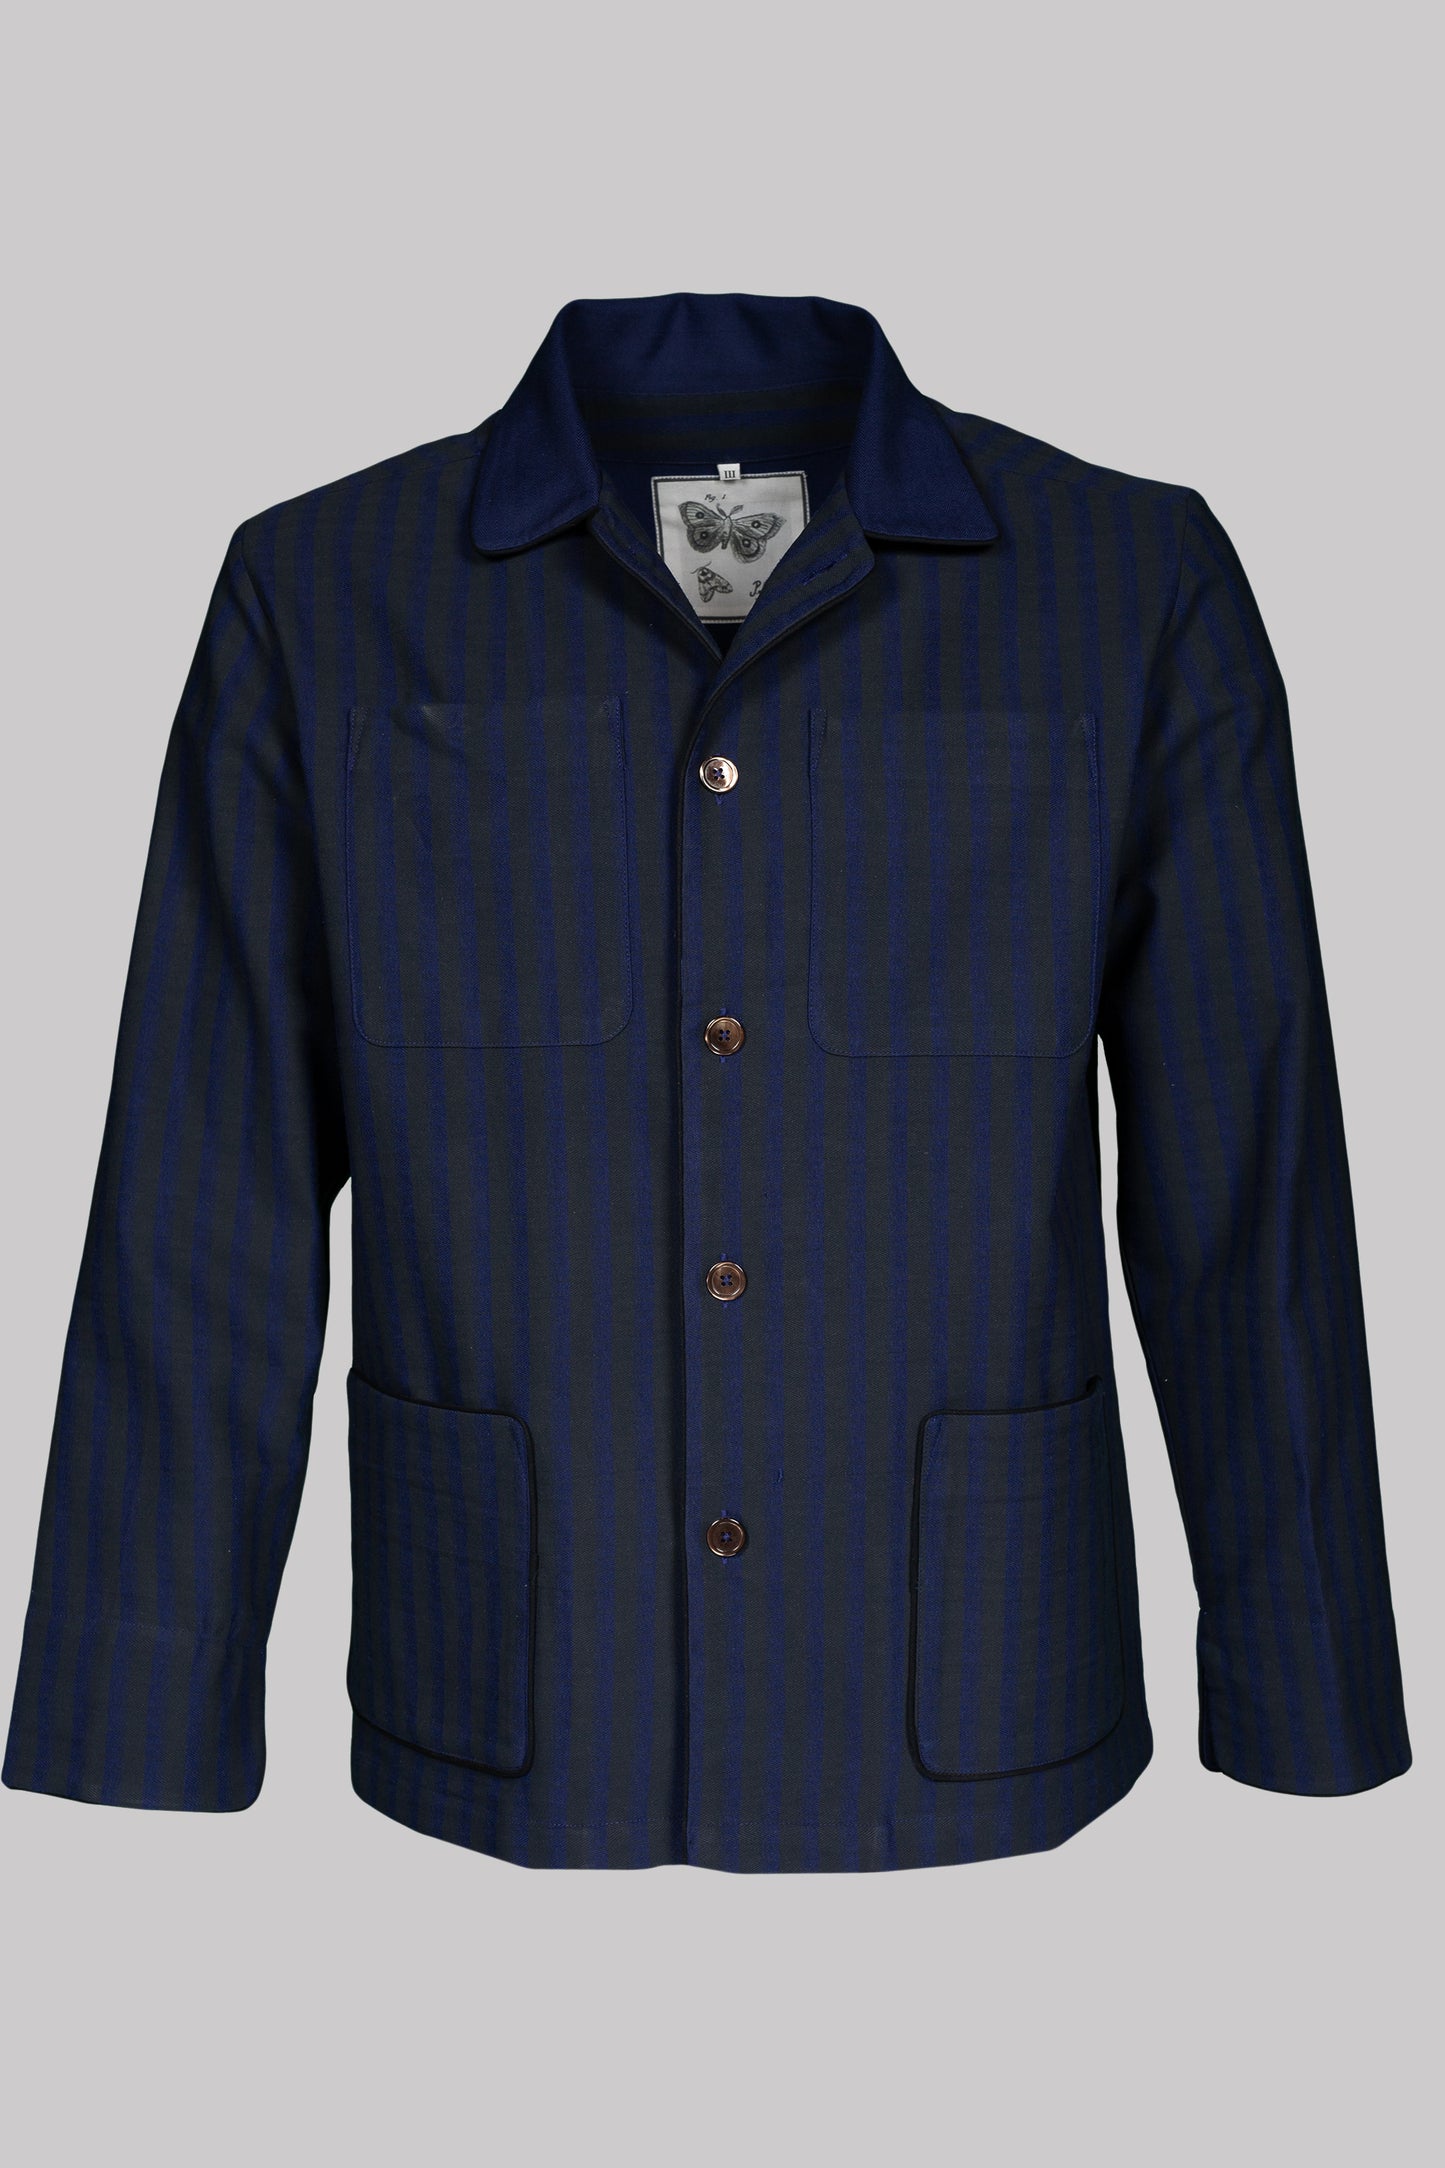 COLONEL-JACKET BLUE-Black-black with black piping 100% COTTON Herringbone-Thick, Brushed-inside Broad-Stripes screen-print